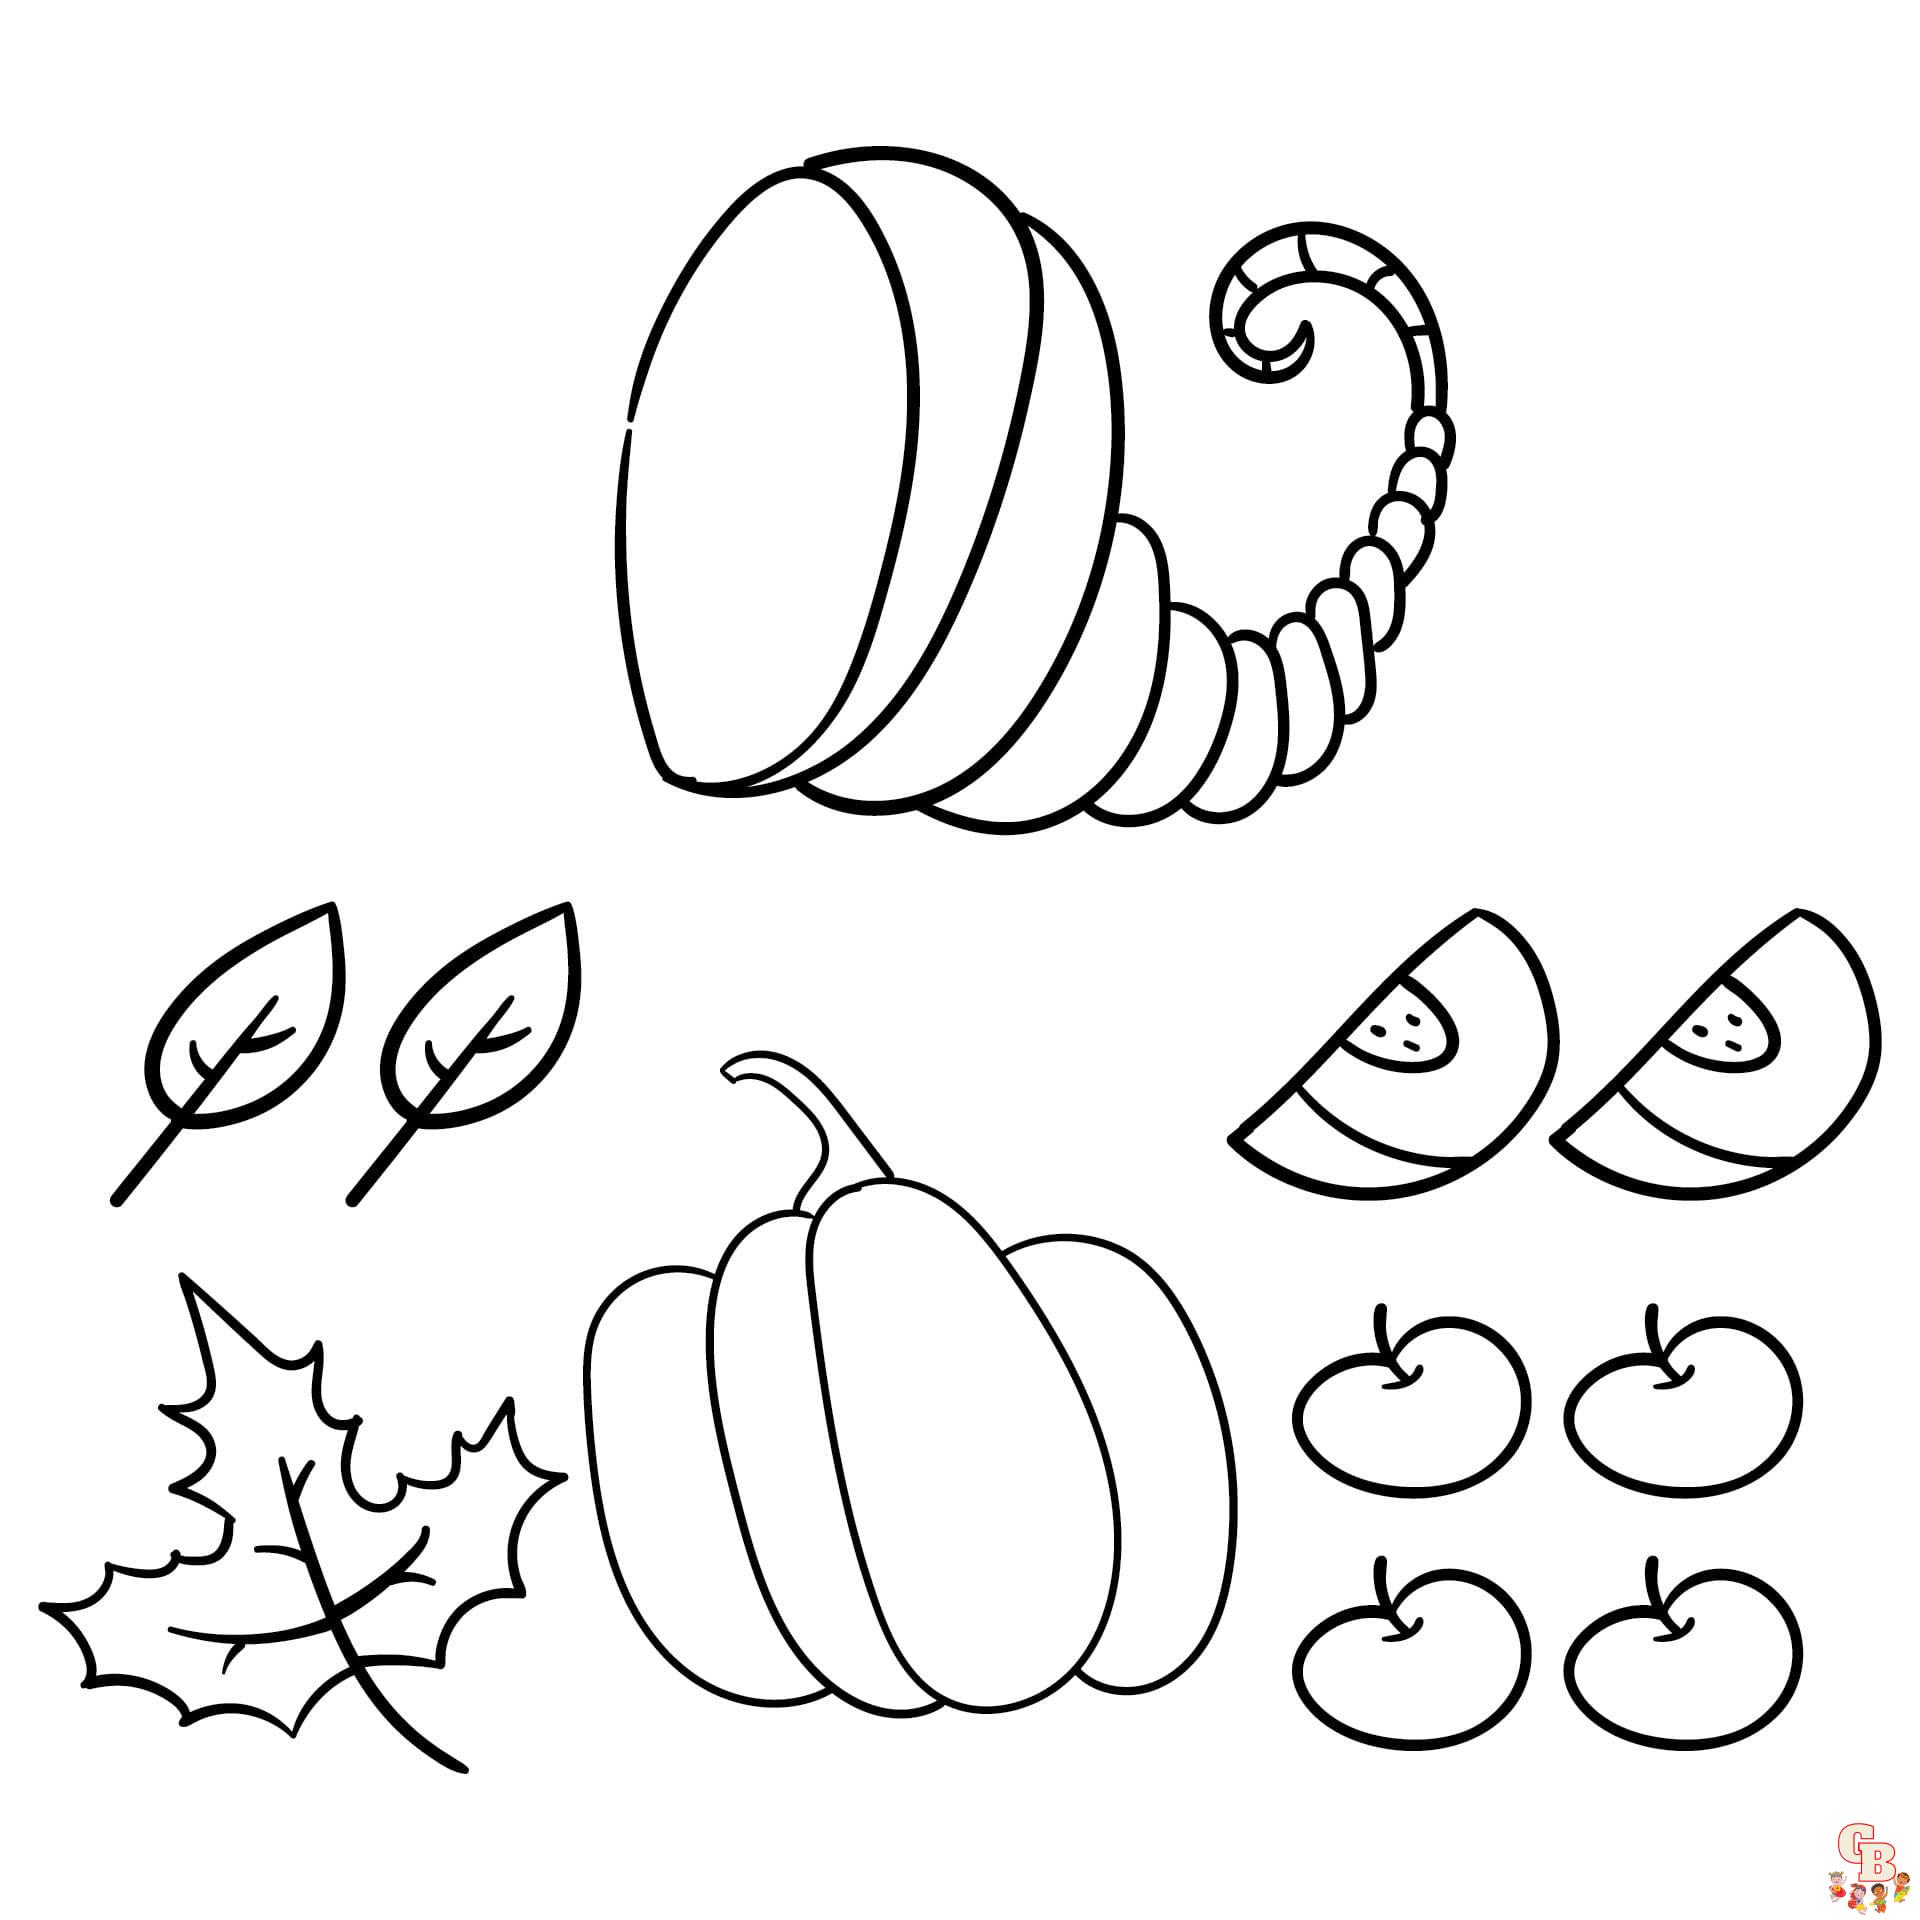 Cornucopia coloring pages to print